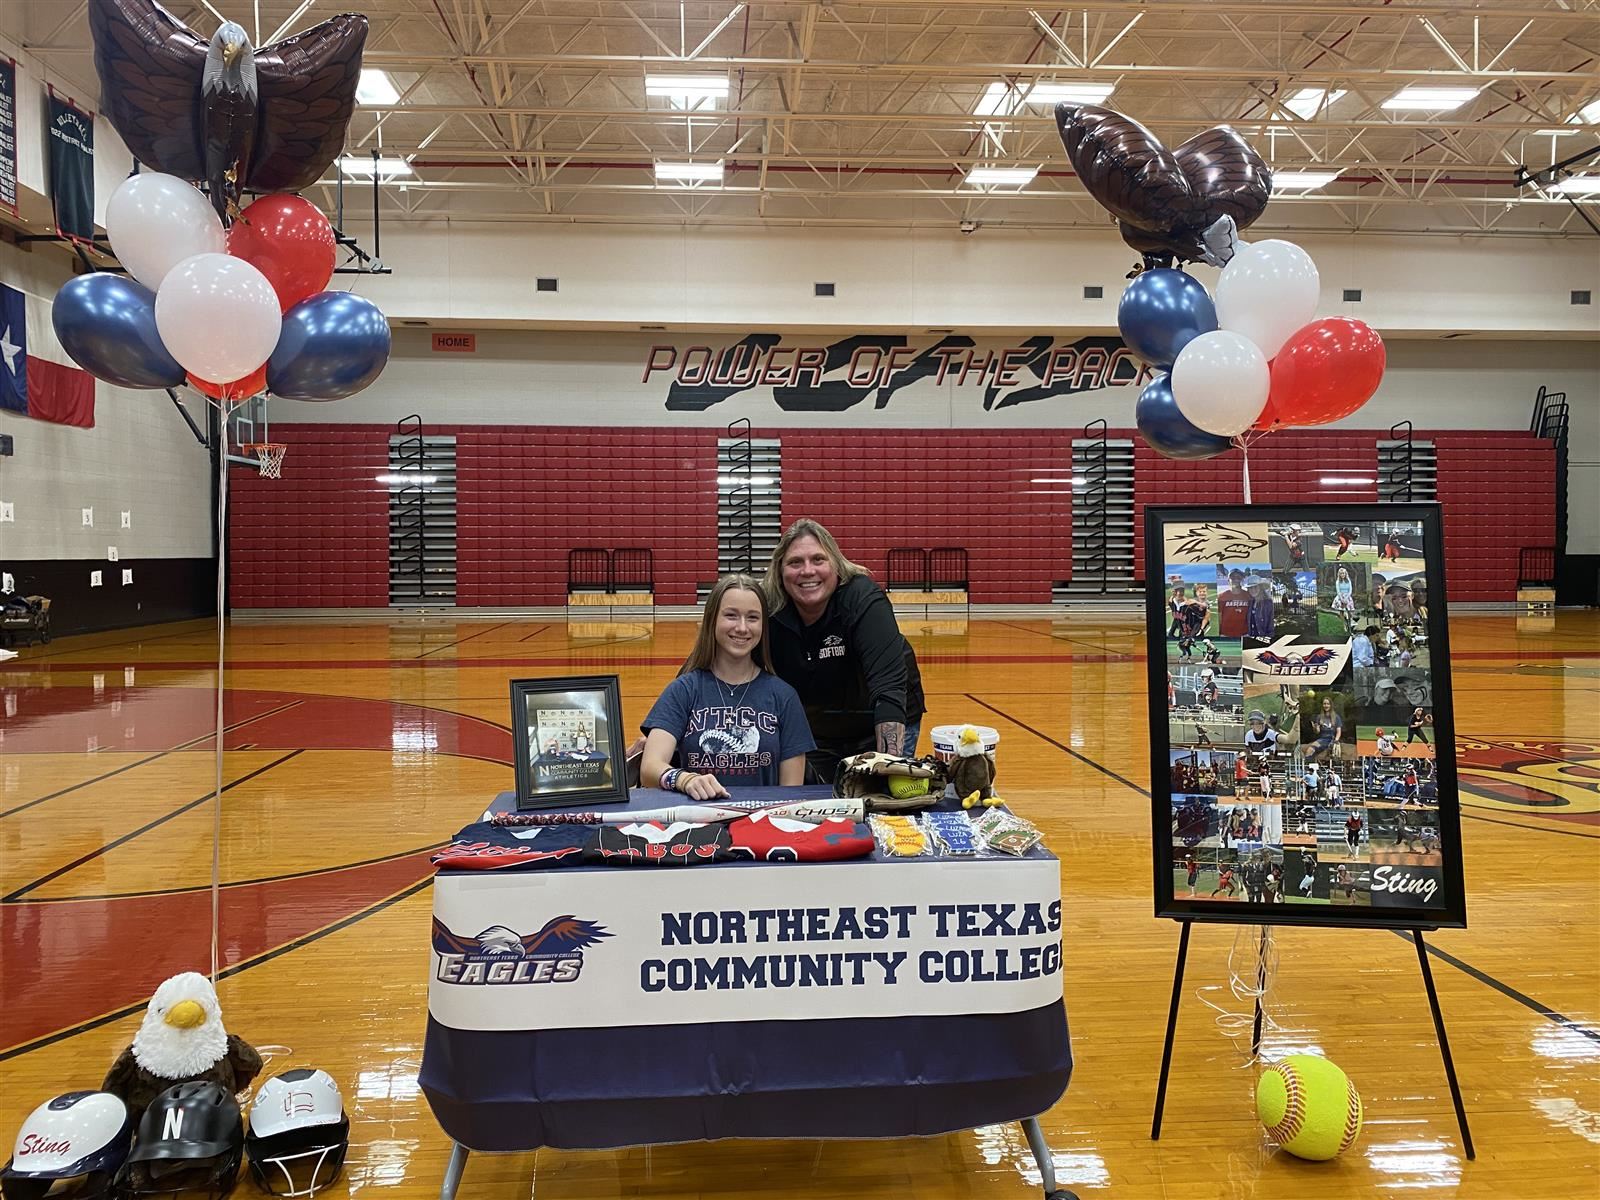 Langham Creek senior Cassidy Luza, seated, signed a letter of intent to play softball at Northeast Texas Community College.